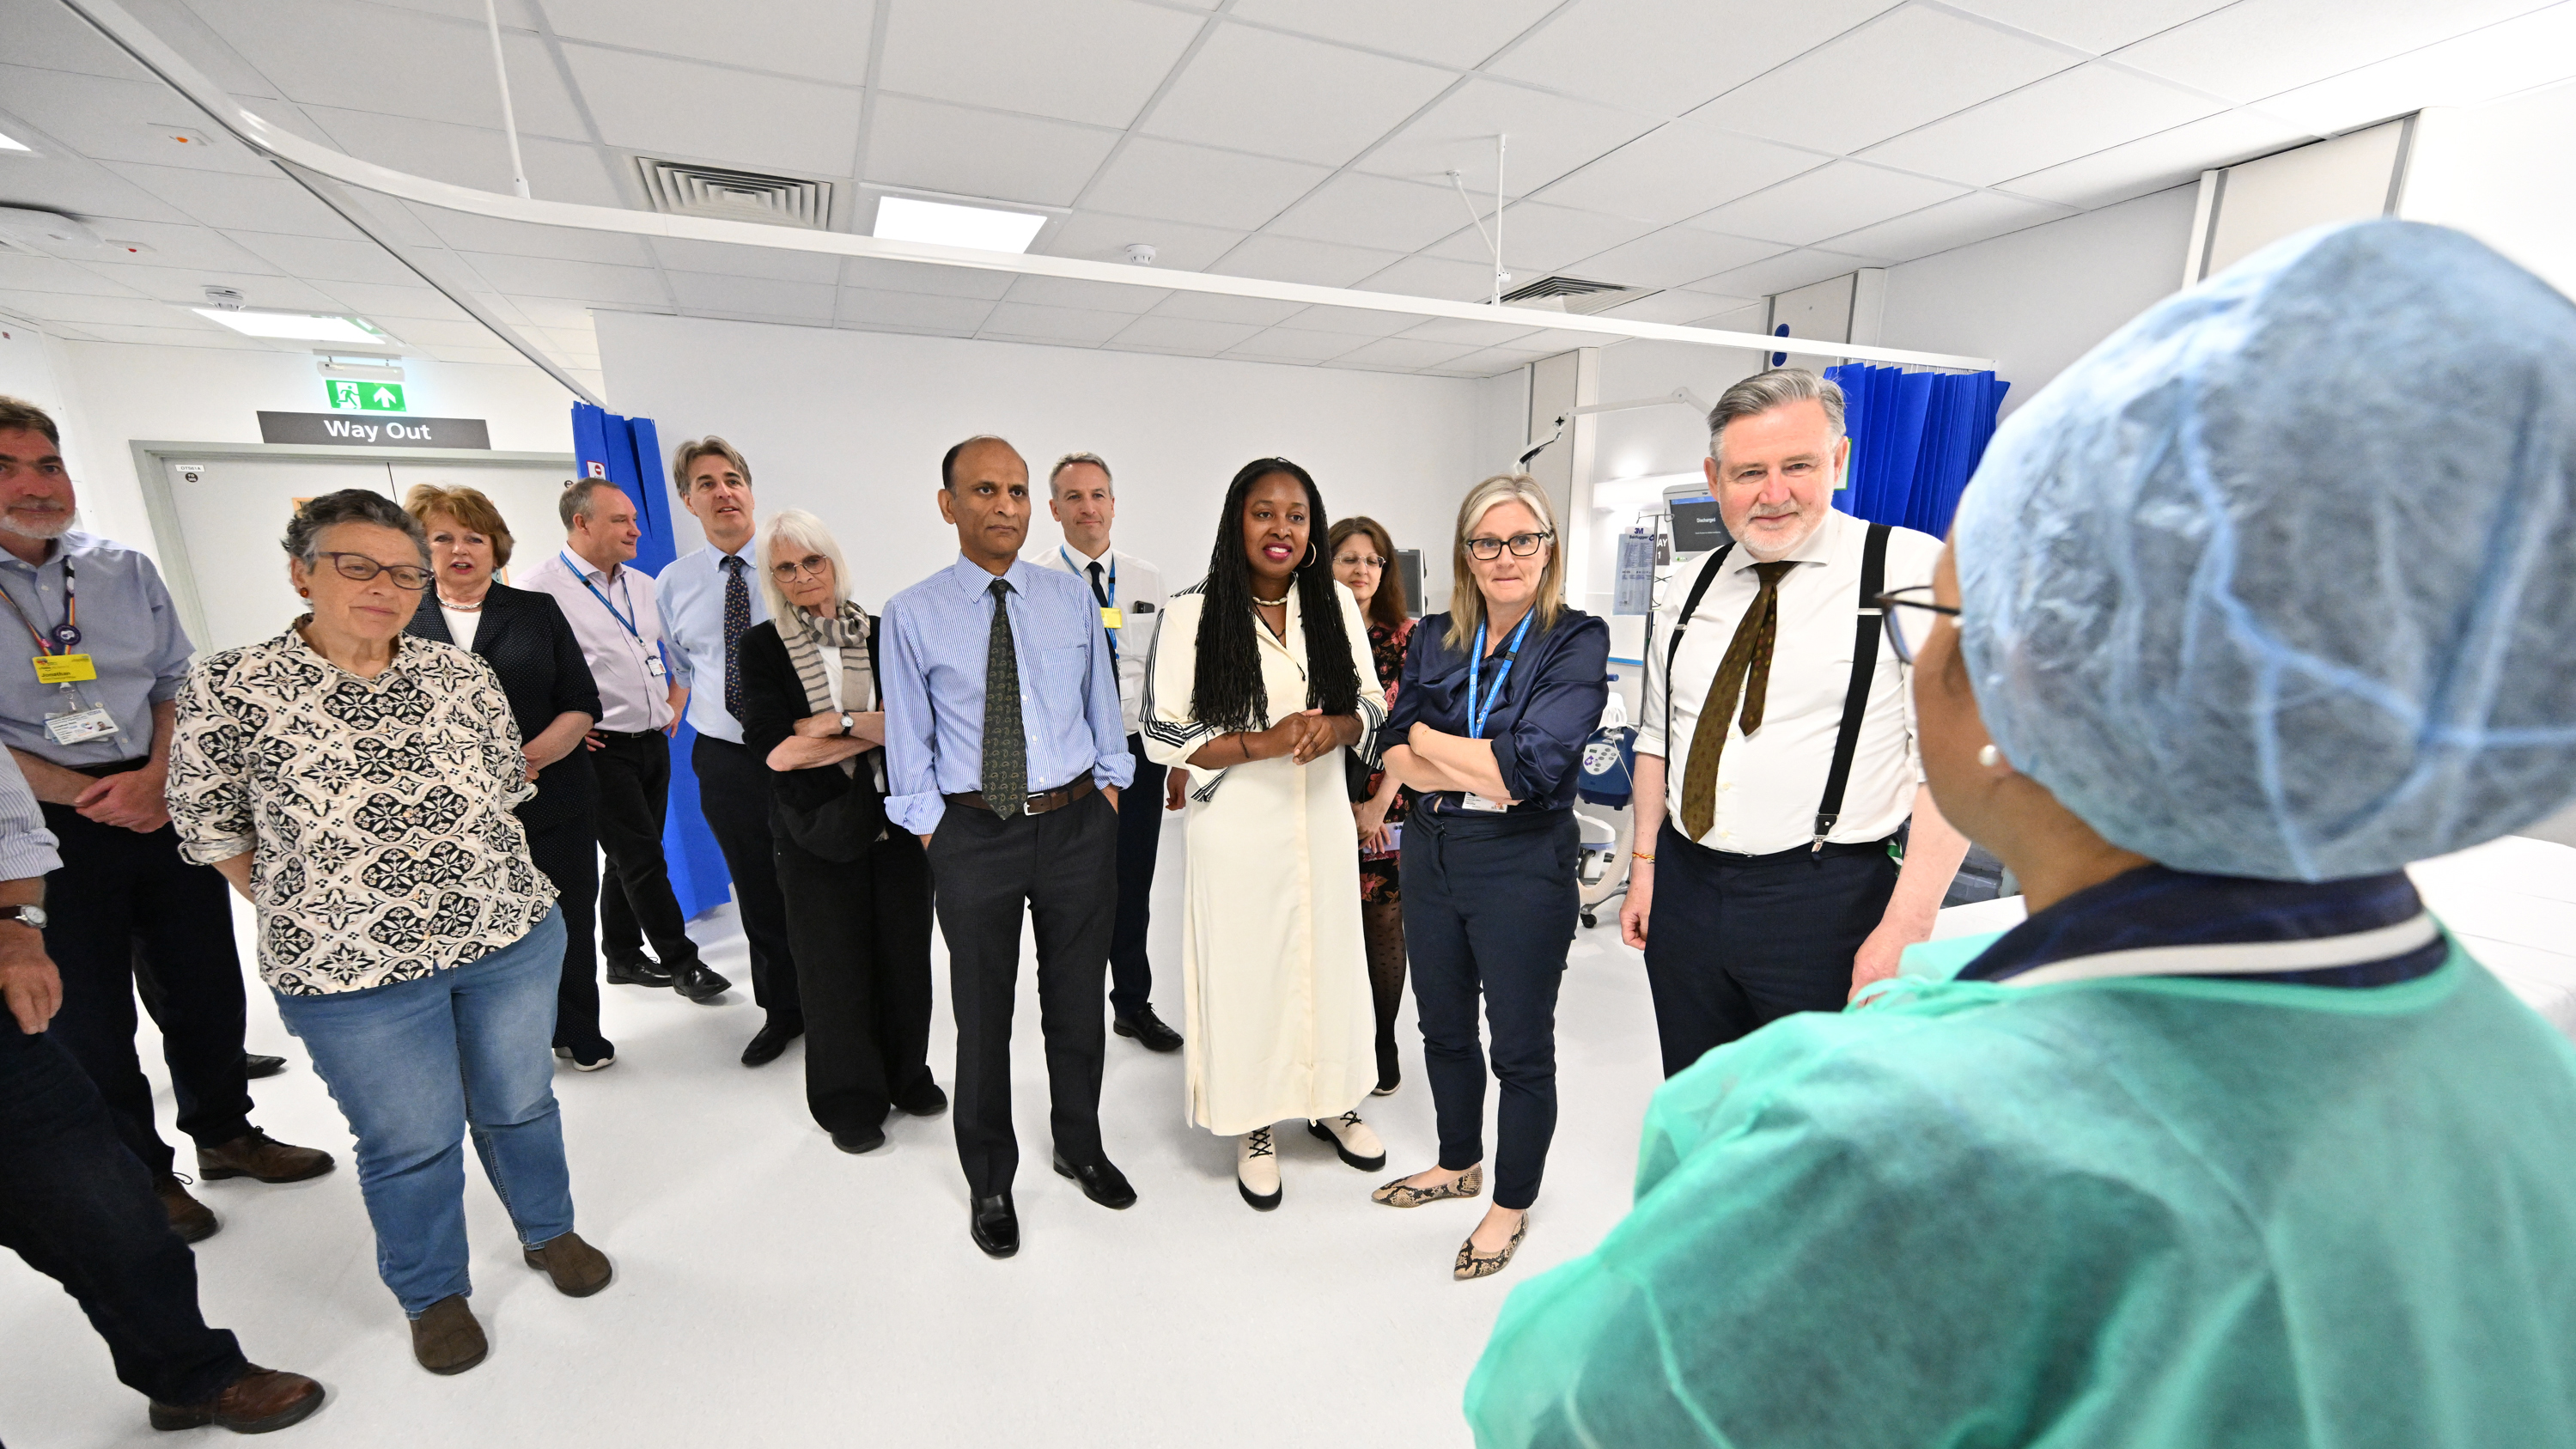 North West London Elective Orthopaedic Centre now officially open